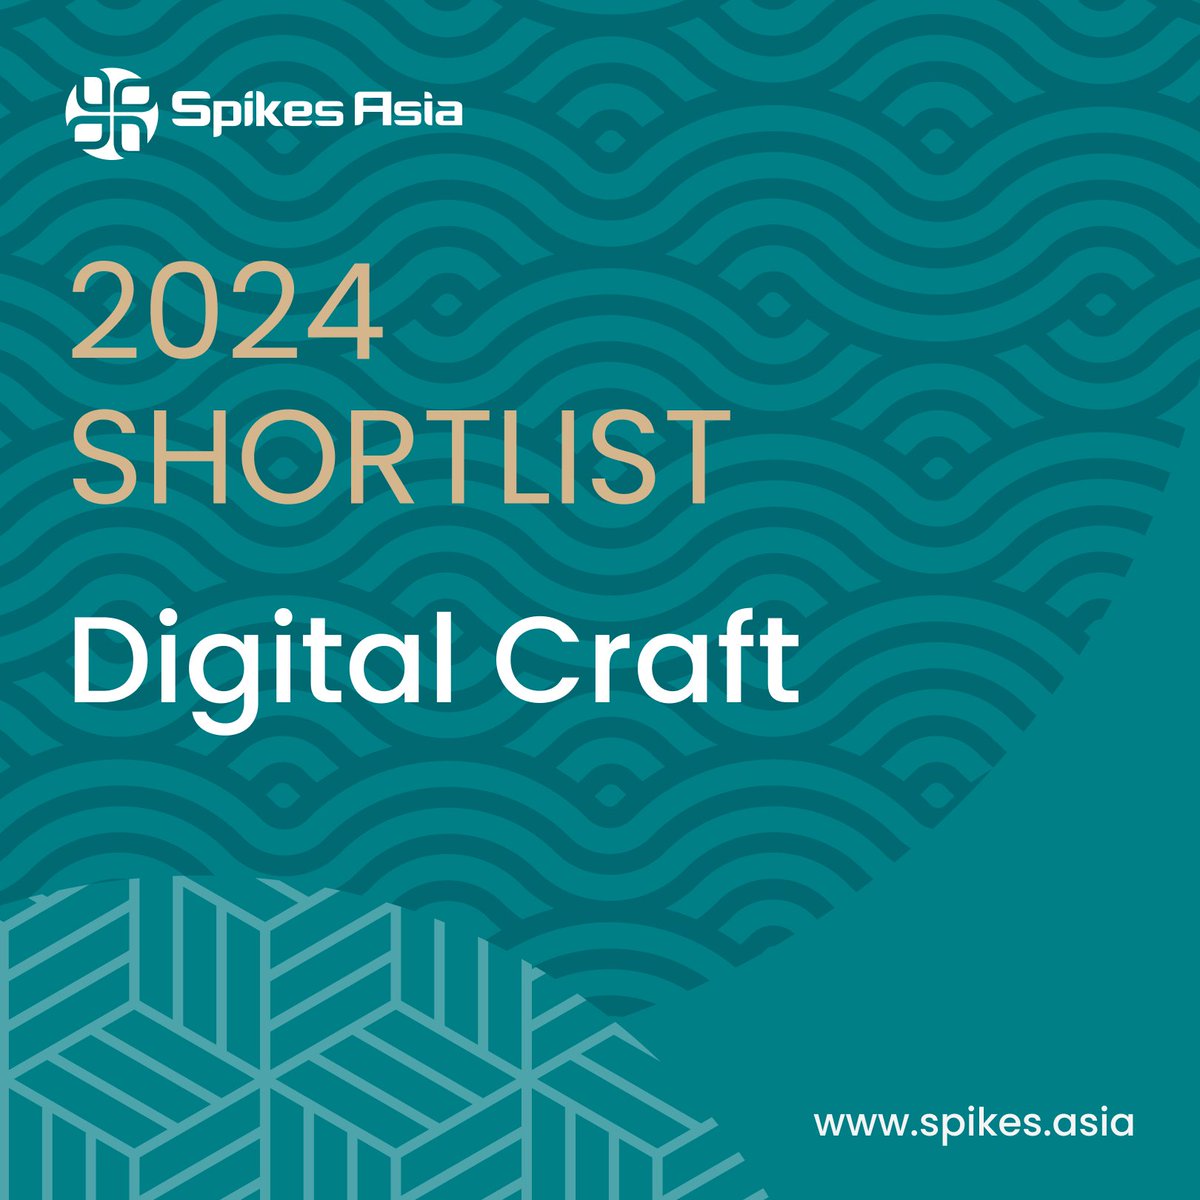 Elated to share that our path-breaking campaign #MyFantasyAdWithSRK for Sunfeast Dark Fantasy is shortlisted in not just one, but two categories of Spikes Asia!
View the shortlists here: lovethework.com/work-awards/aw…
#SpikesAsia2024 #SpikesAsia #digitalawards